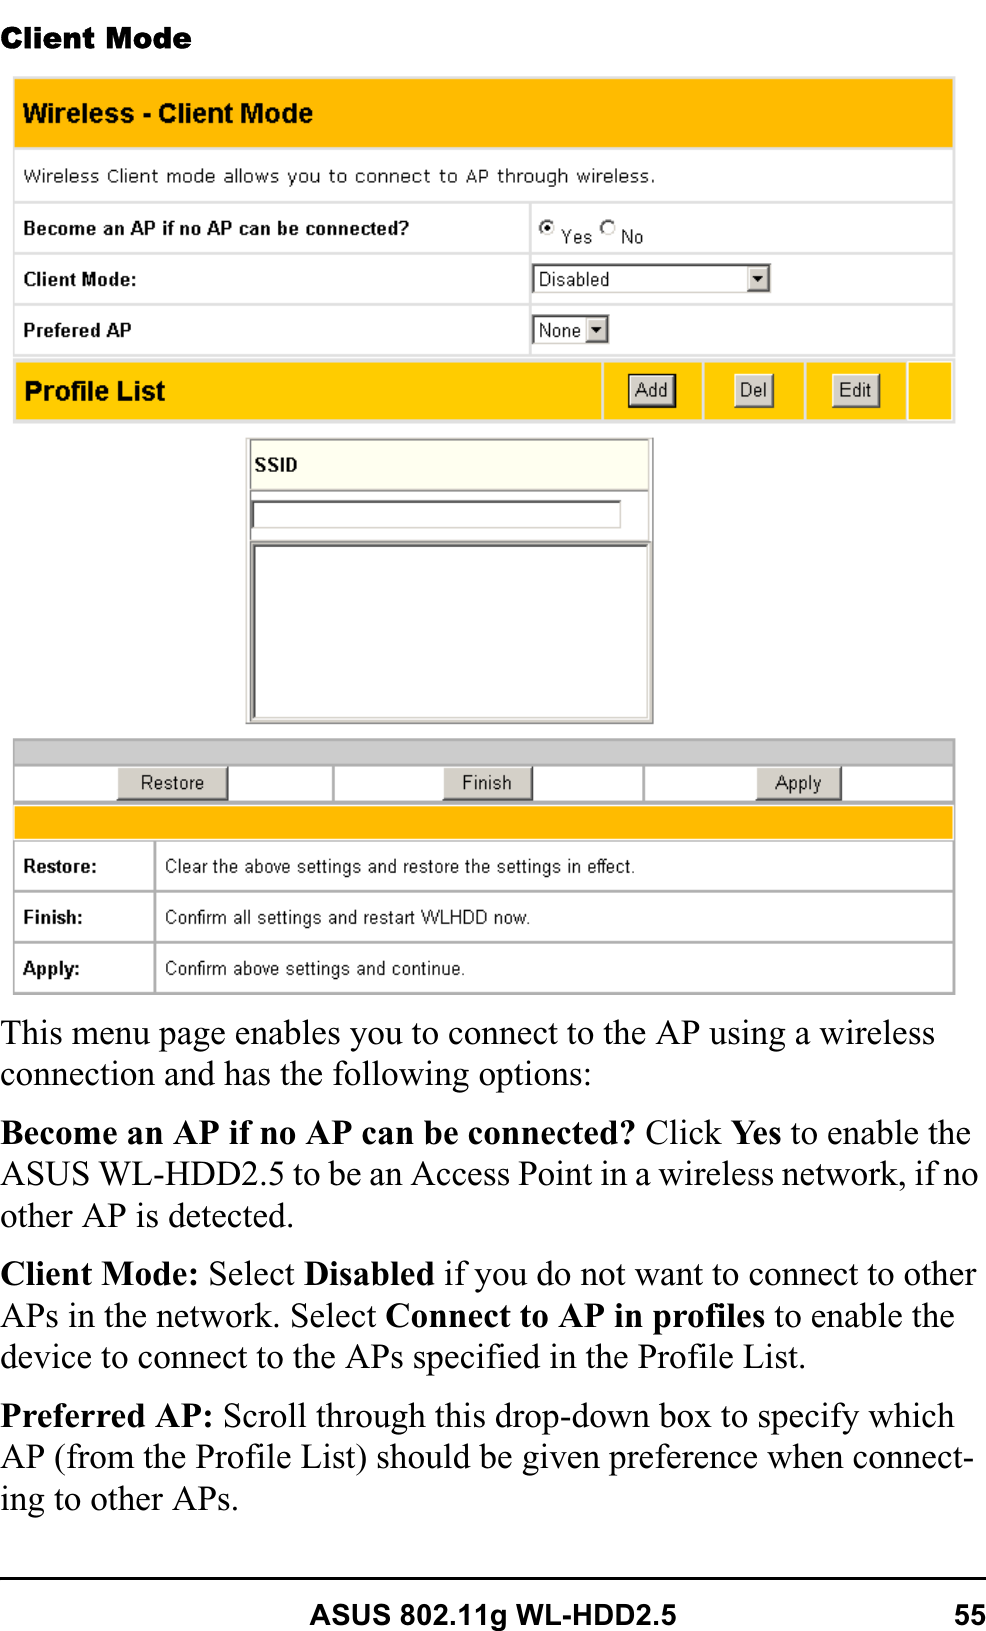 ASUS 802.11g WL-HDD2.5 55Client ModeThis menu page enables you to connect to the AP using a wireless connection and has the following options:Become an AP if no AP can be connected? Click Ye s  to enable the ASUS WL-HDD2.5 to be an Access Point in a wireless network, if no other AP is detected.Client Mode: Select Disabled if you do not want to connect to other APs in the network. Select Connect to AP in profiles to enable the device to connect to the APs specified in the Profile List.Preferred AP: Scroll through this drop-down box to specify which AP (from the Profile List) should be given preference when connect-ing to other APs.